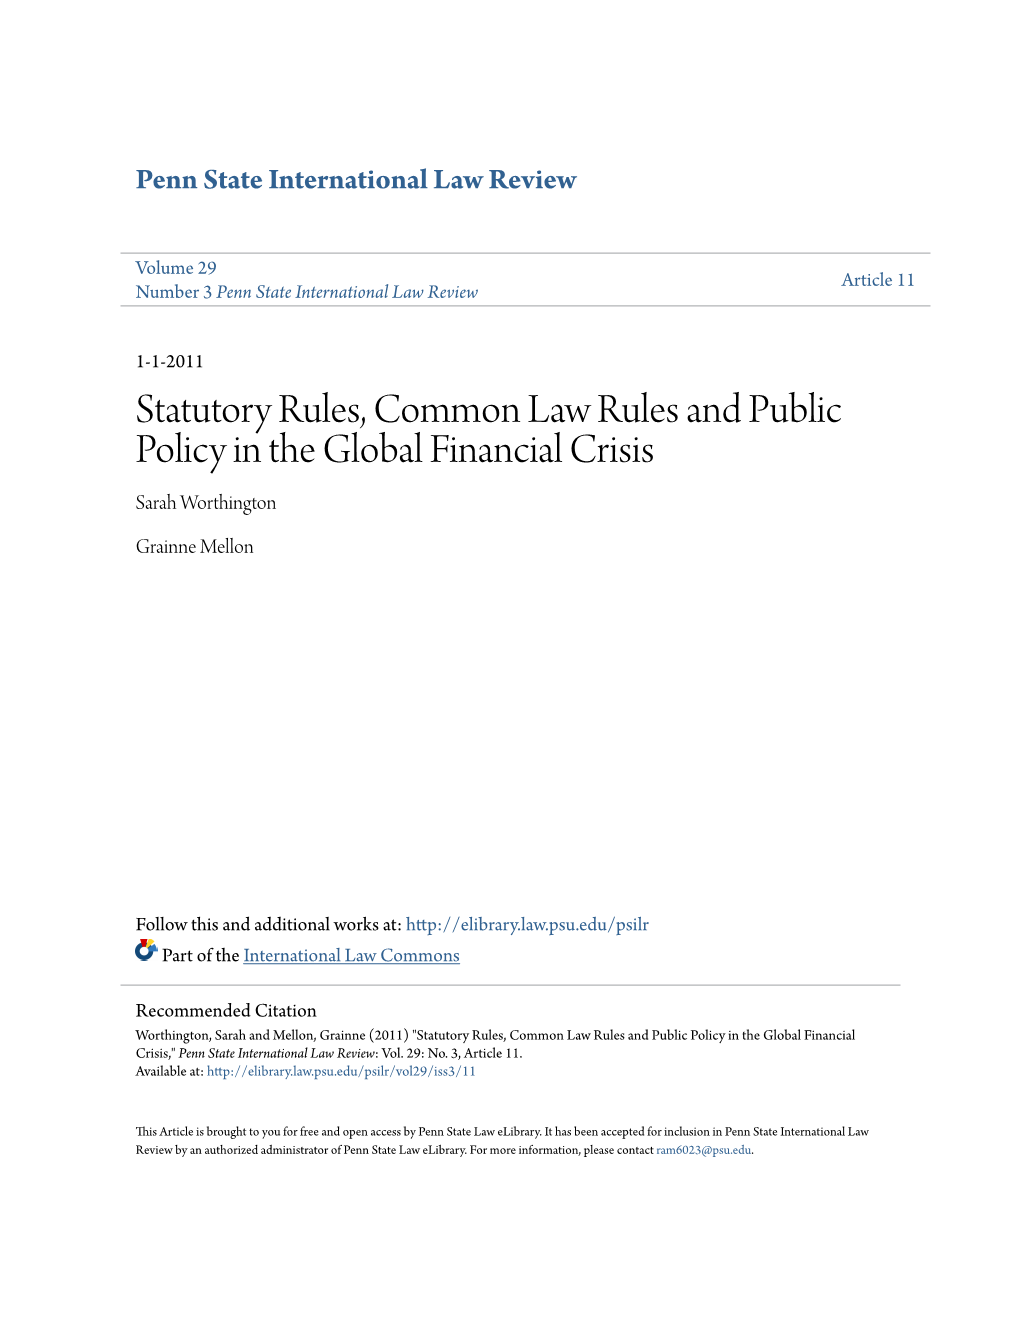 Statutory Rules, Common Law Rules and Public Policy in the Global Financial Crisis Sarah Worthington